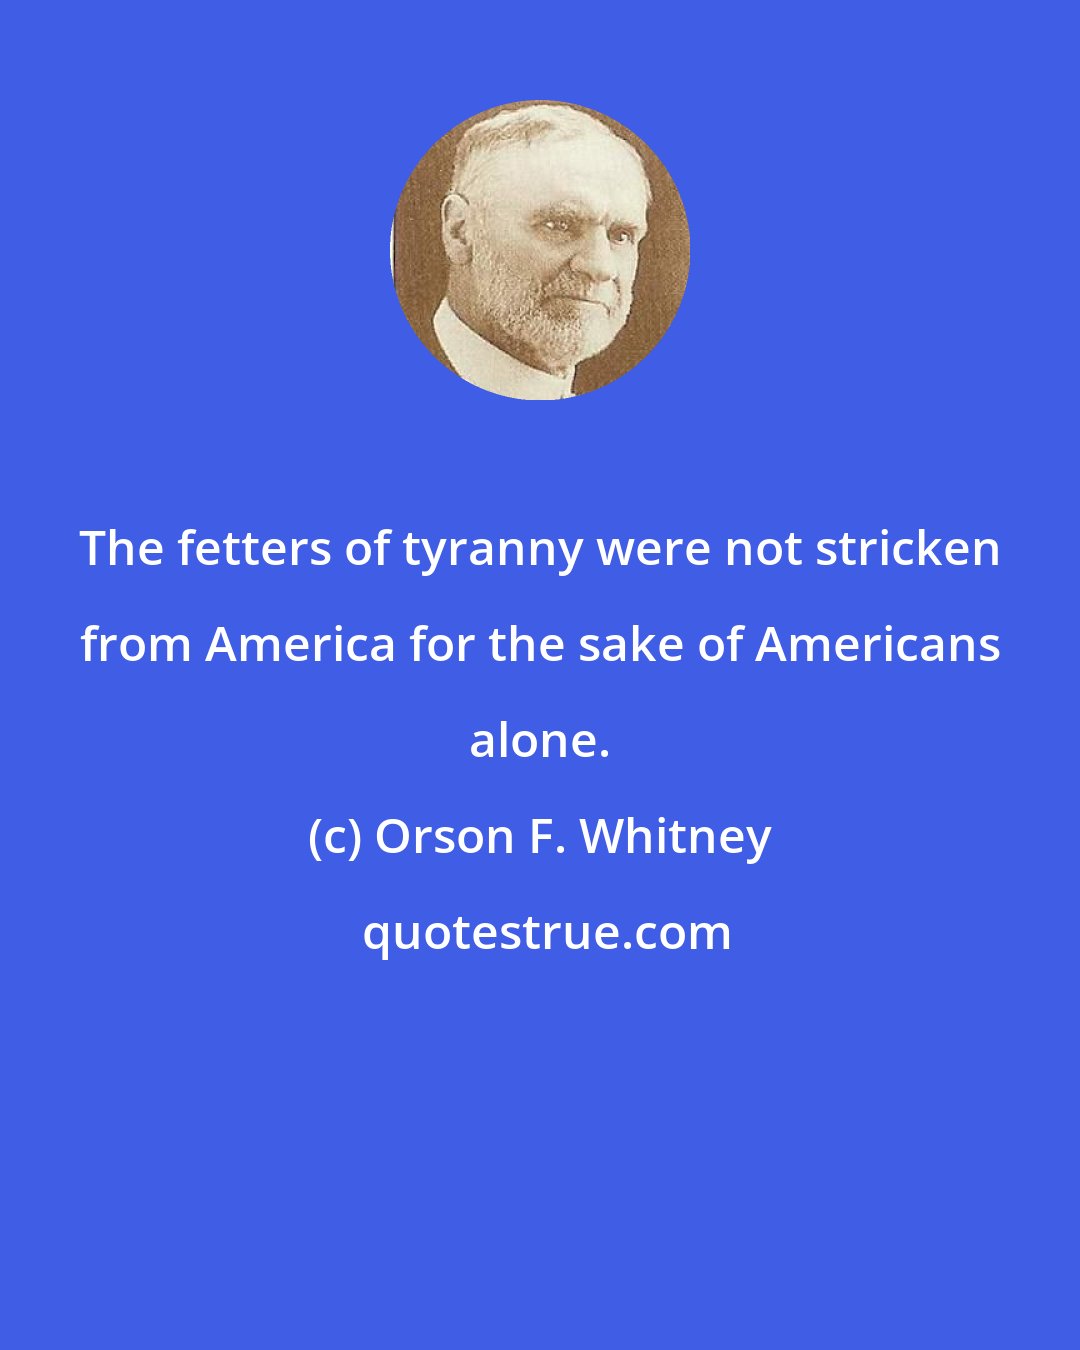 Orson F. Whitney: The fetters of tyranny were not stricken from America for the sake of Americans alone.